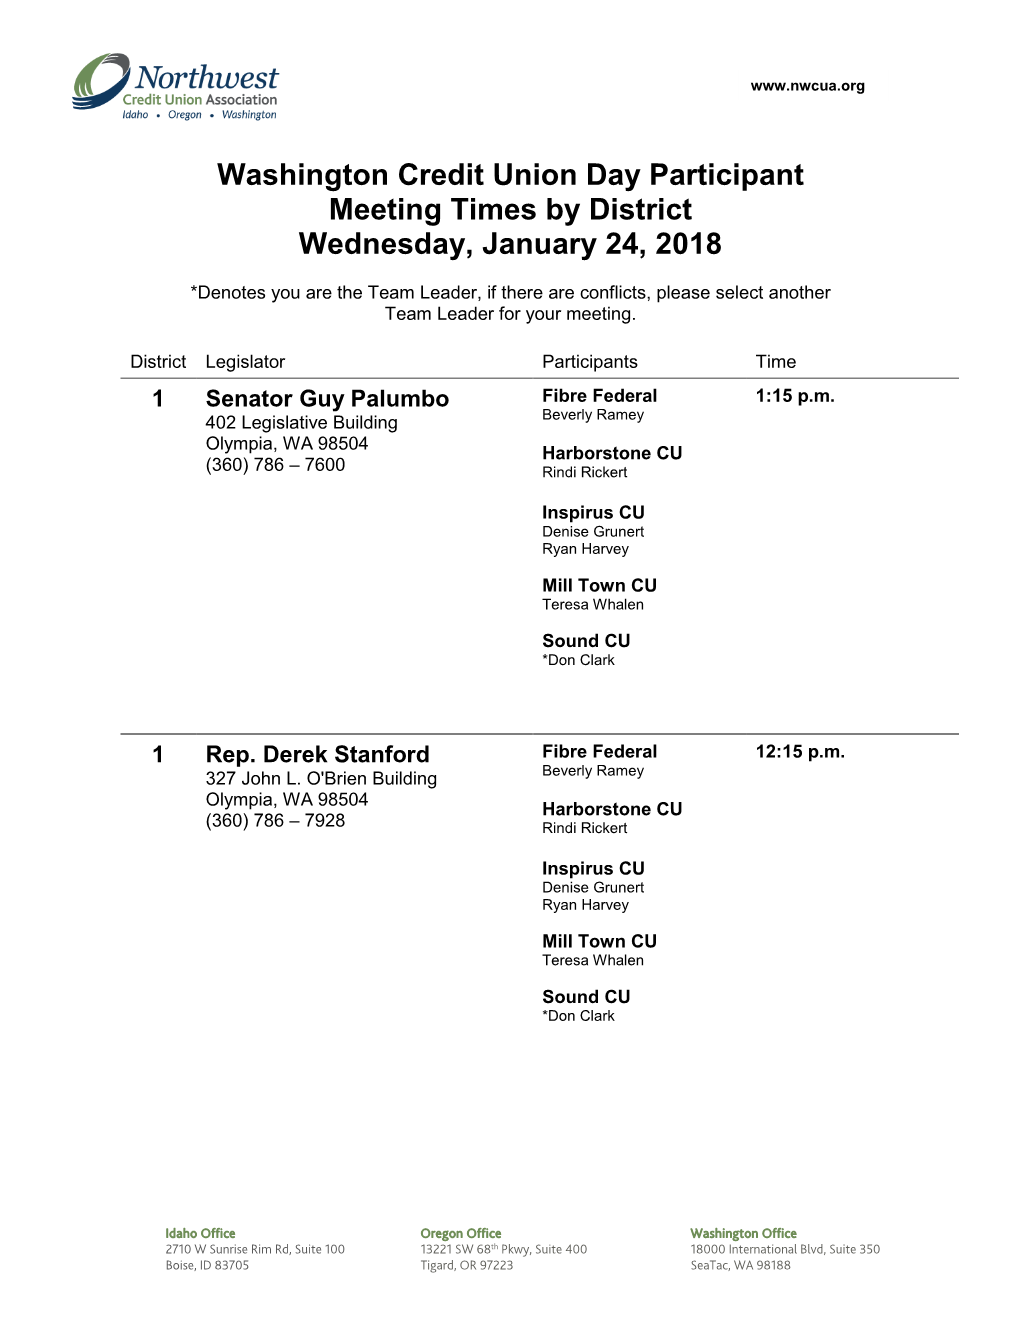 Washington Credit Union Day Participant Meeting Times by District Wednesday, January 24, 2018